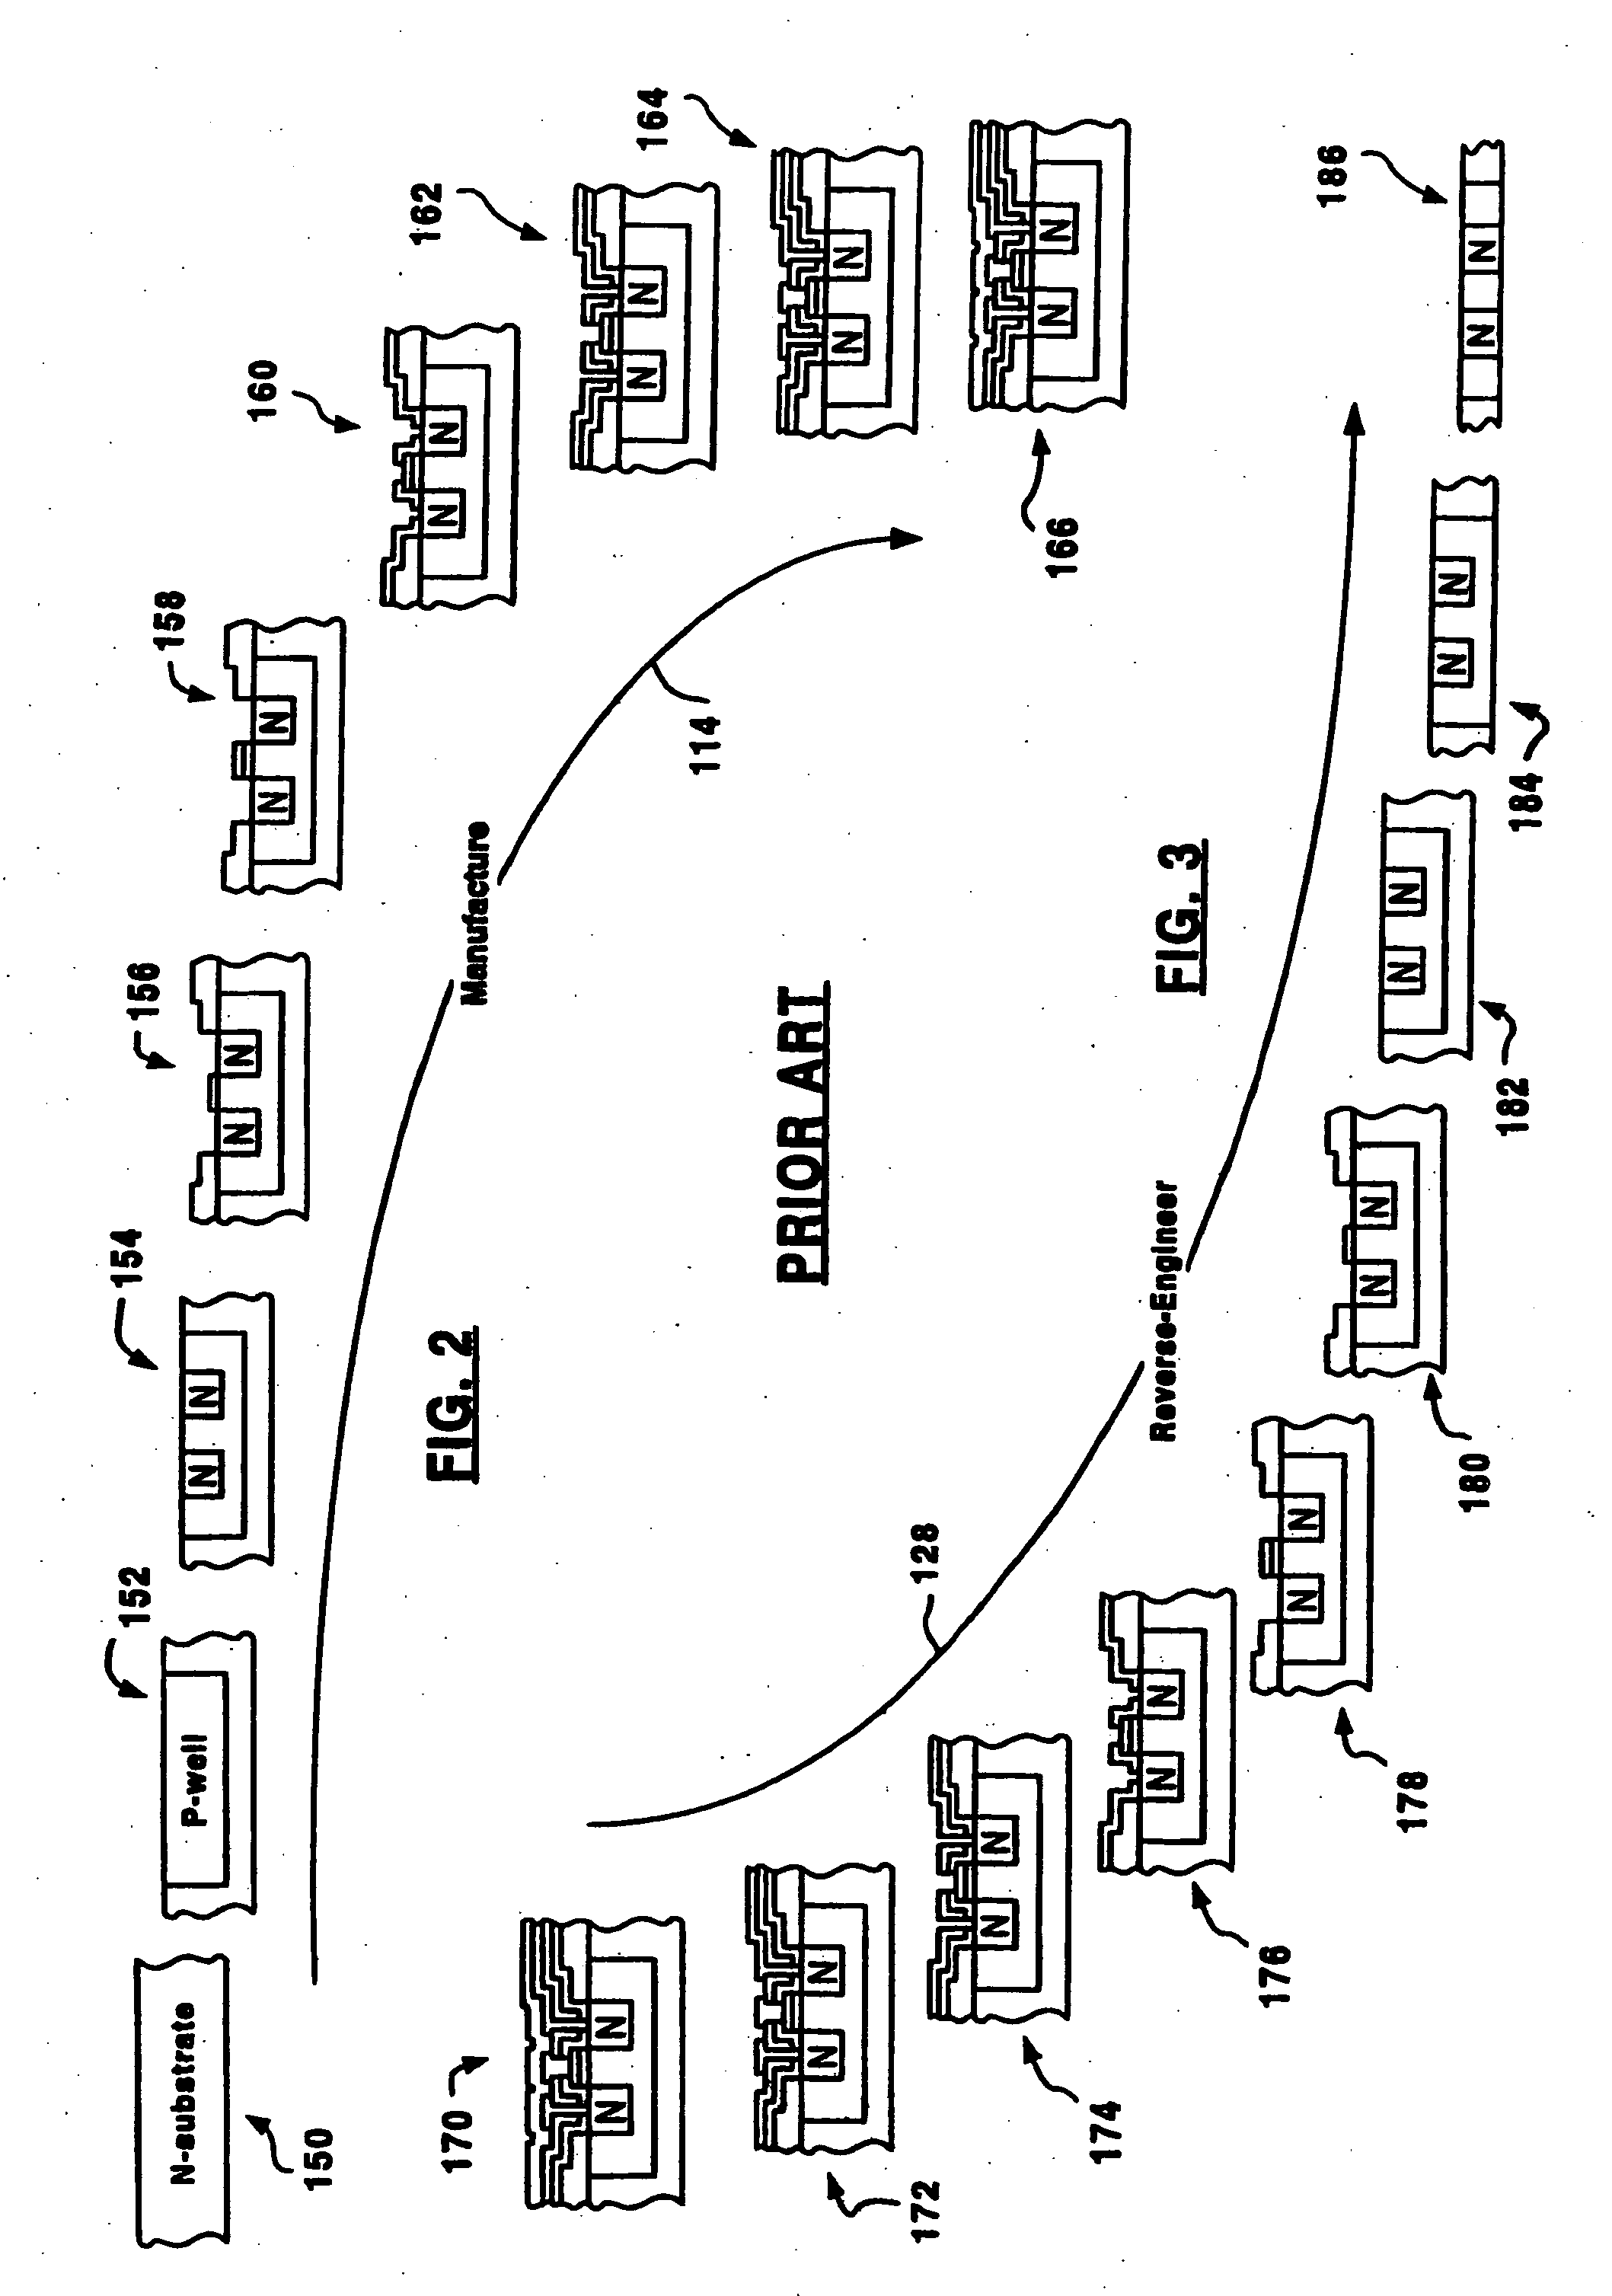 Design analysis workstation for analyzing integrated circuits